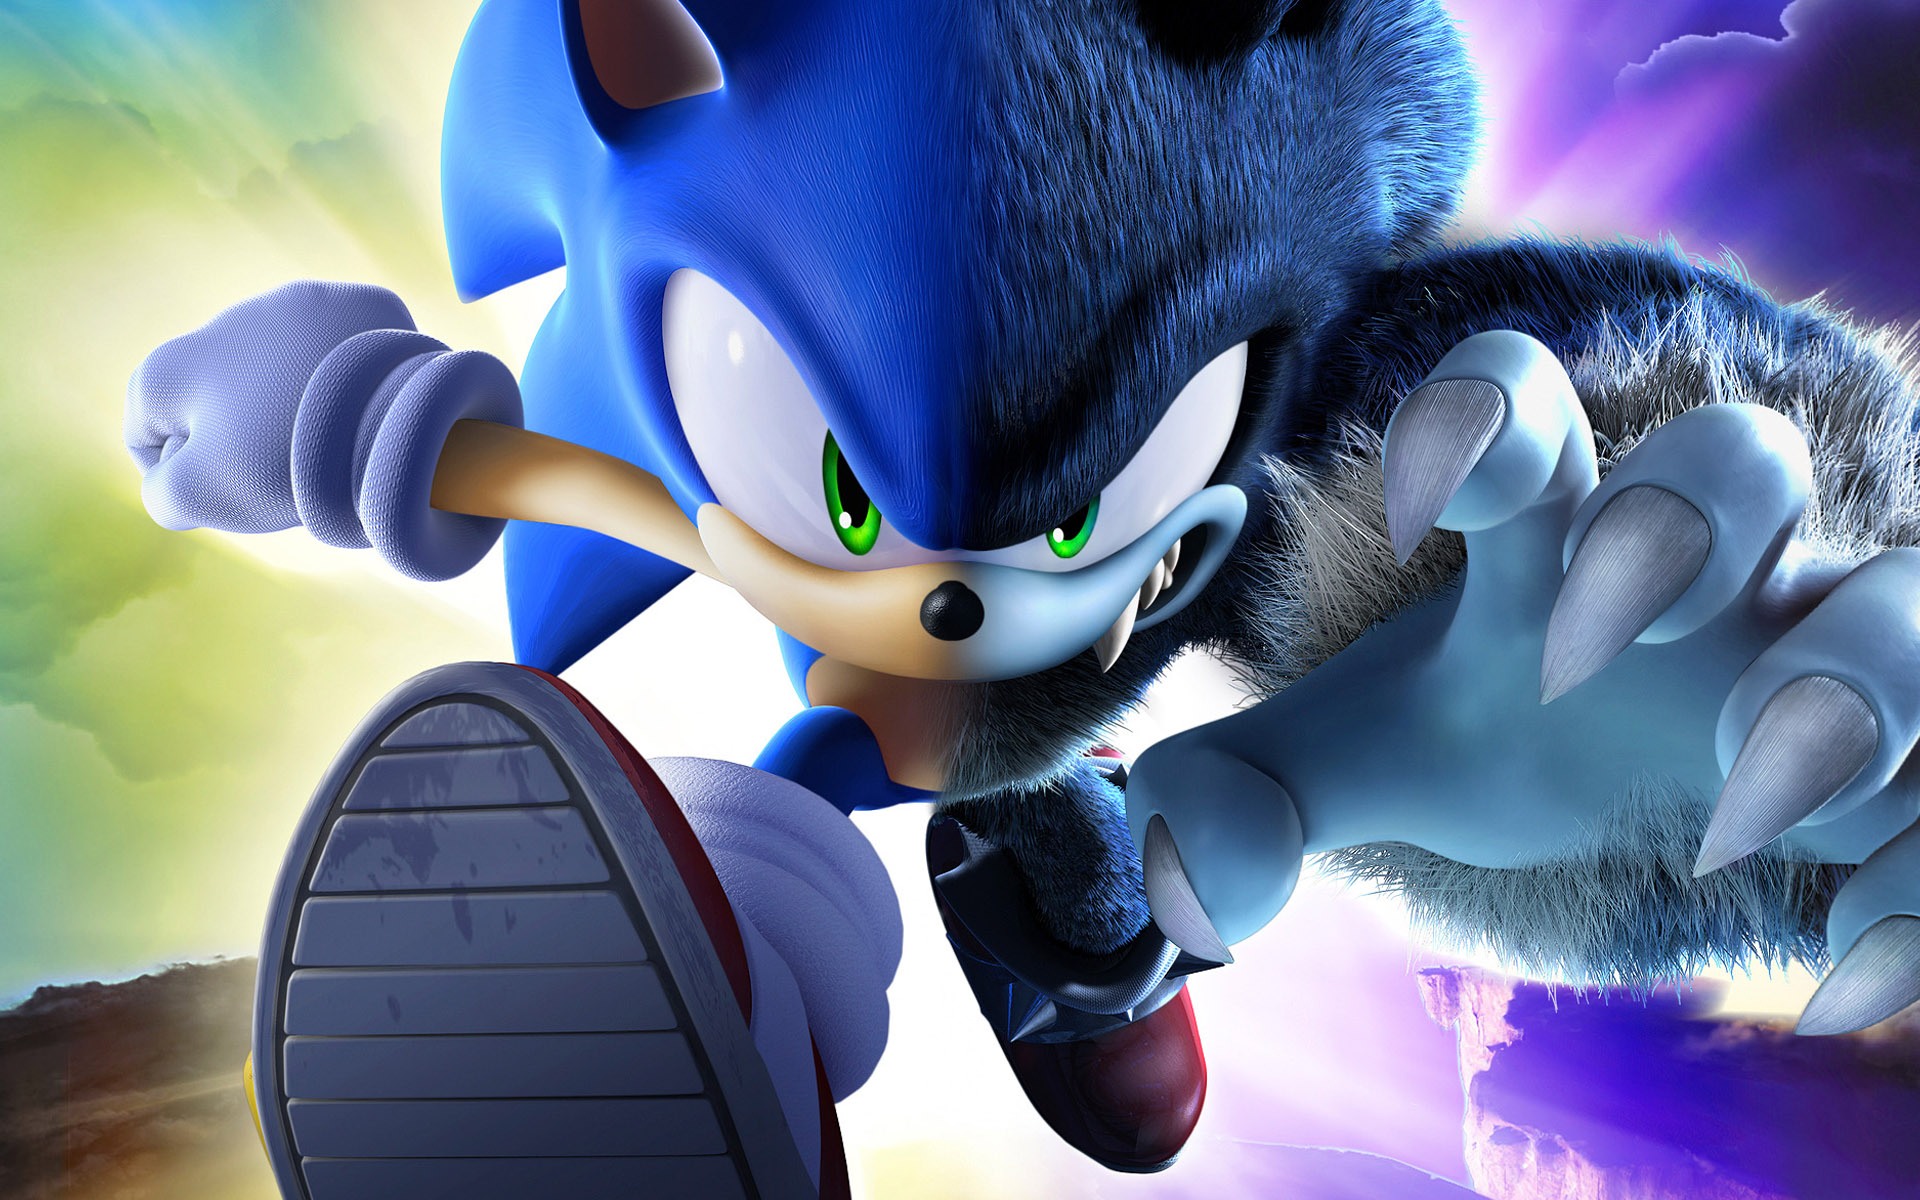 New Sonic Wallpaper For PC by SonicLuminous on DeviantArt